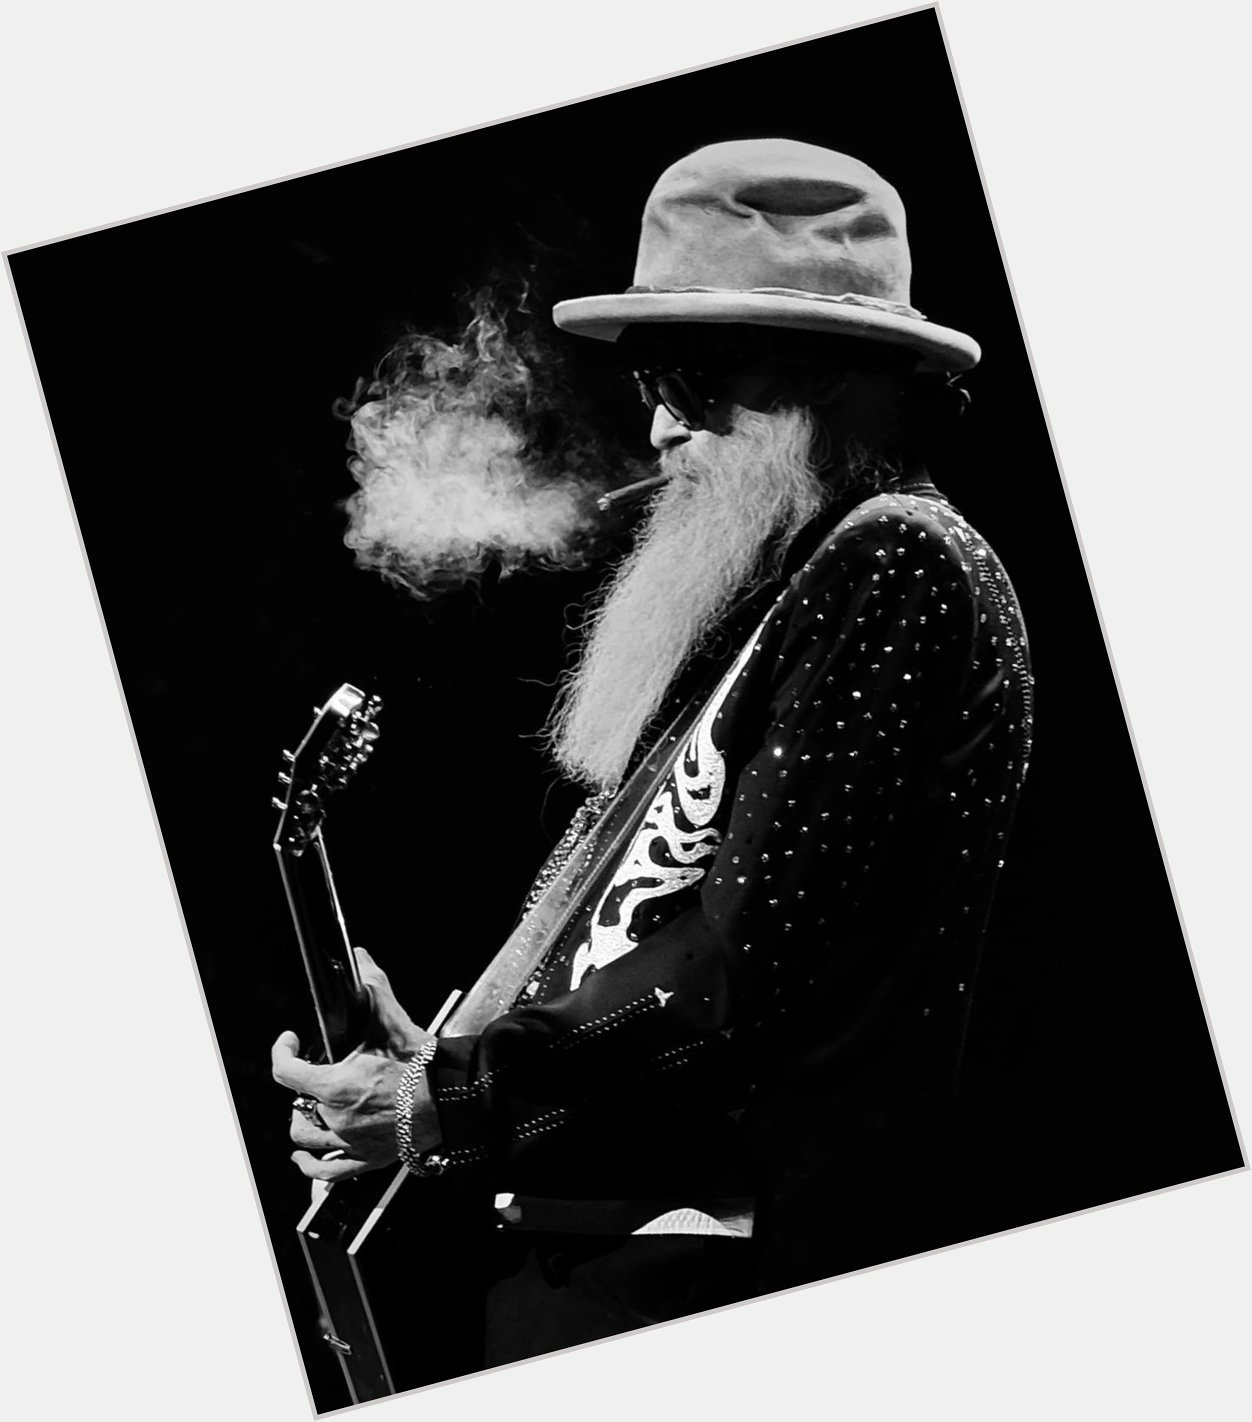 Happy 70th Birthday to Billy Gibbons of hope you have a great day! And see you soon!    